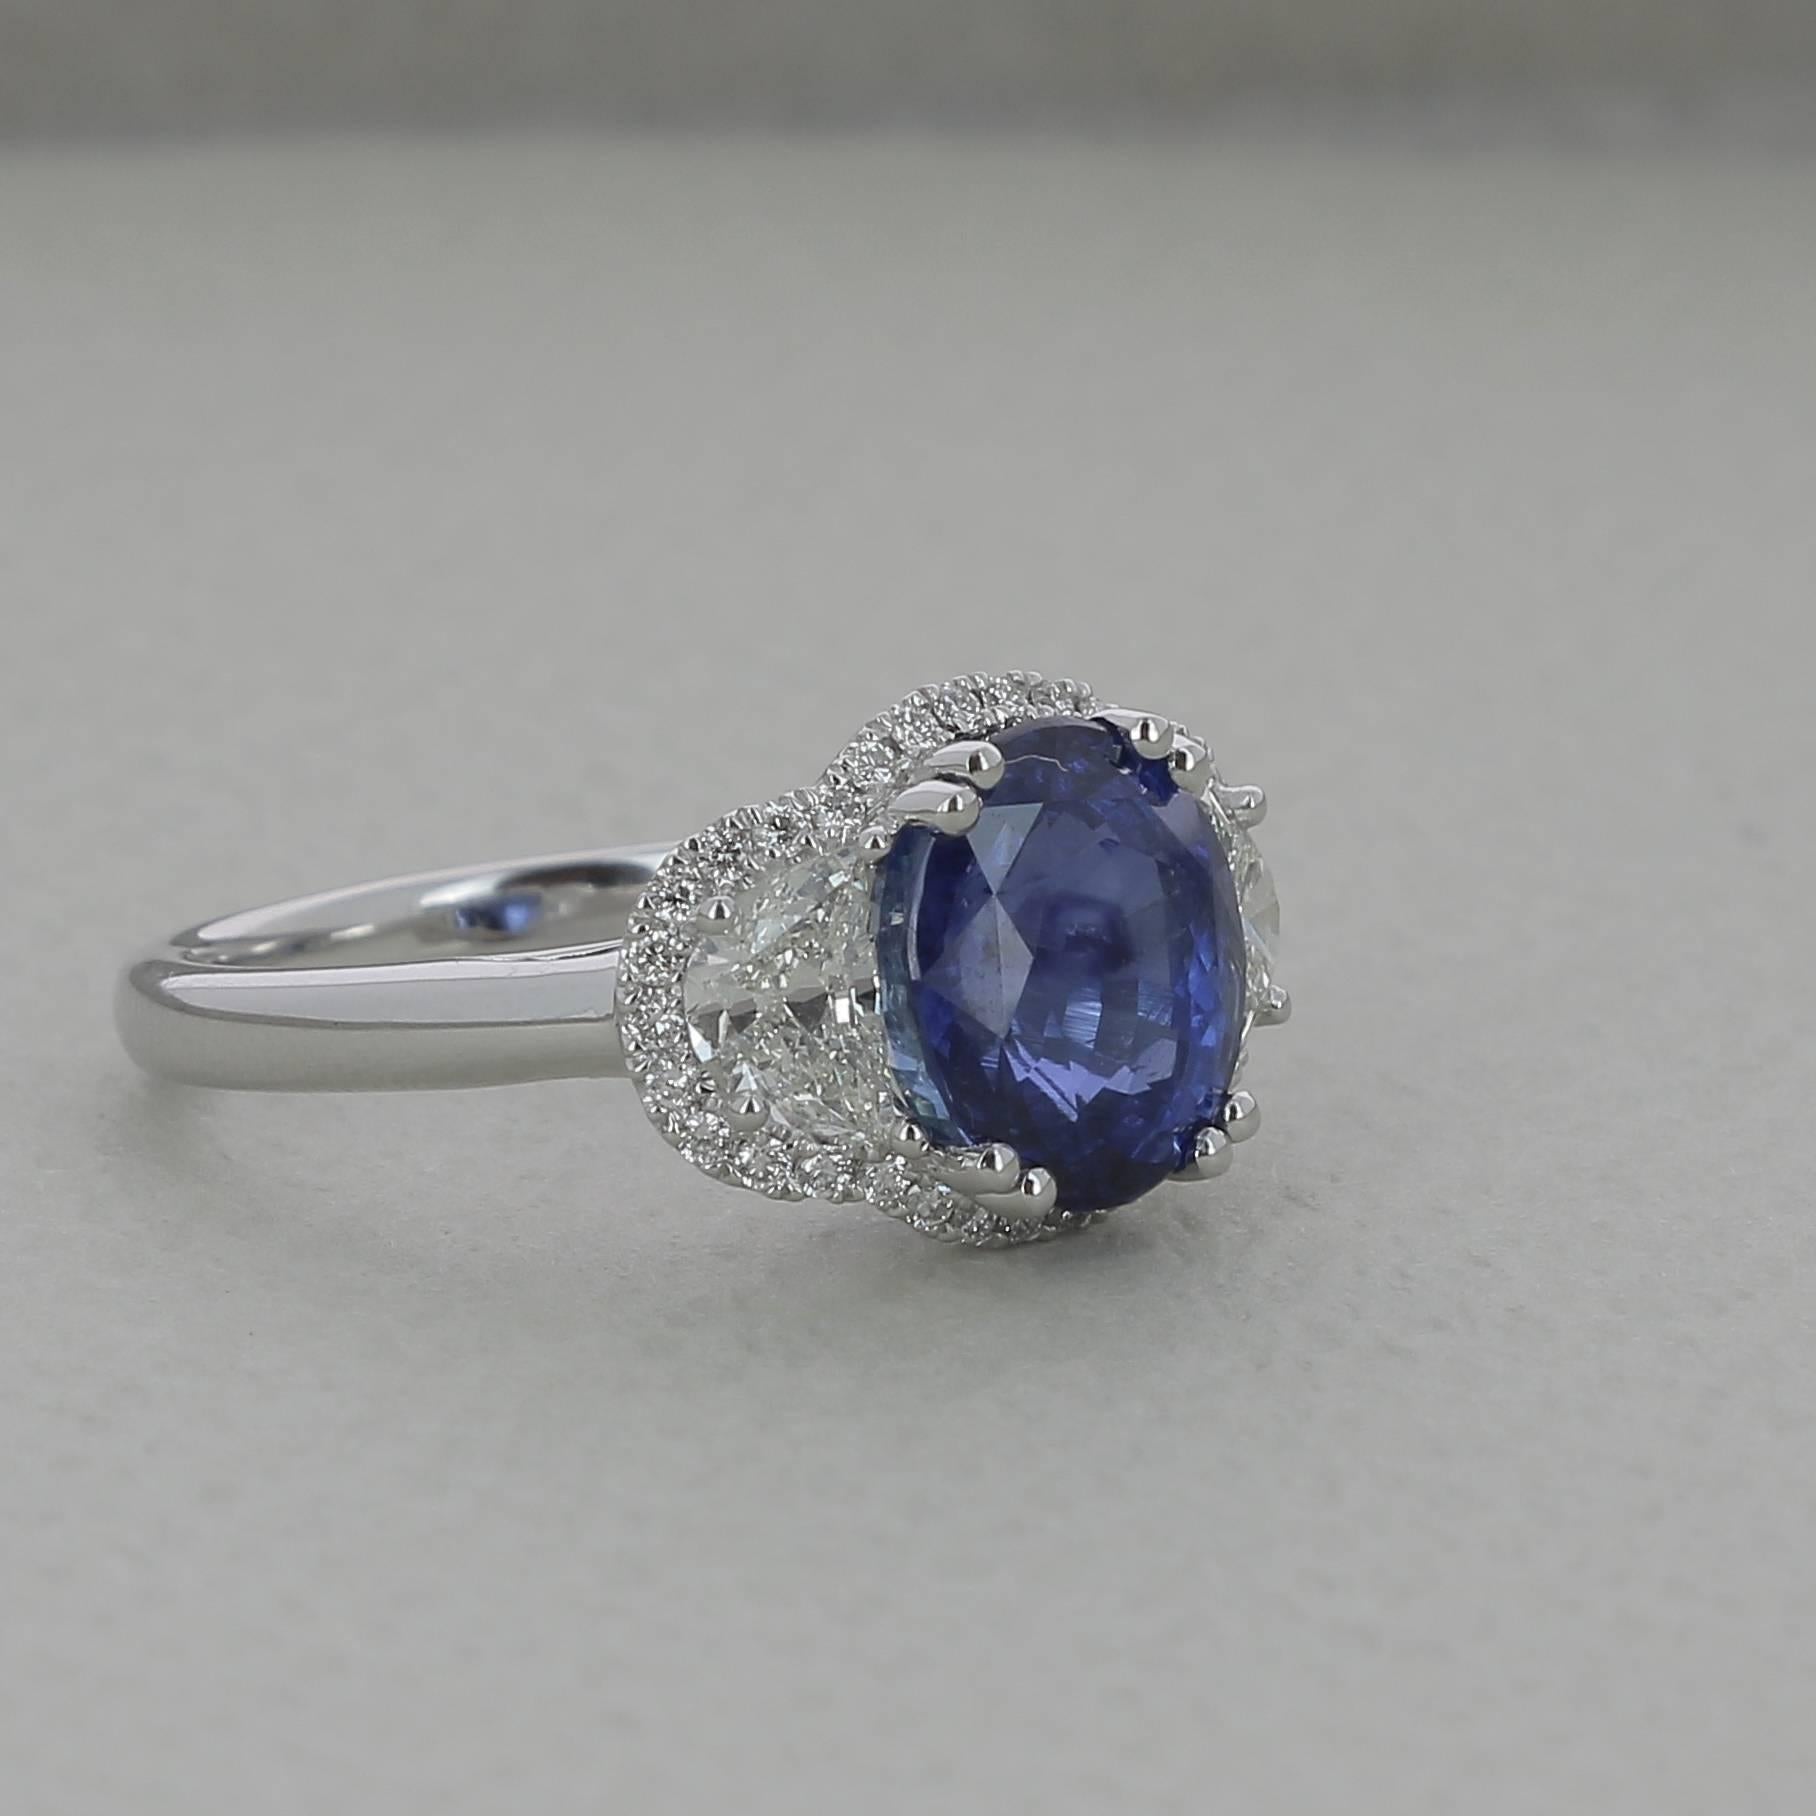 4.55 Carat Ceylon Royal Blue Sapphire Cocktail Ring Half-Moon Diamond 18K Gold In New Condition For Sale In Istanbul, TR